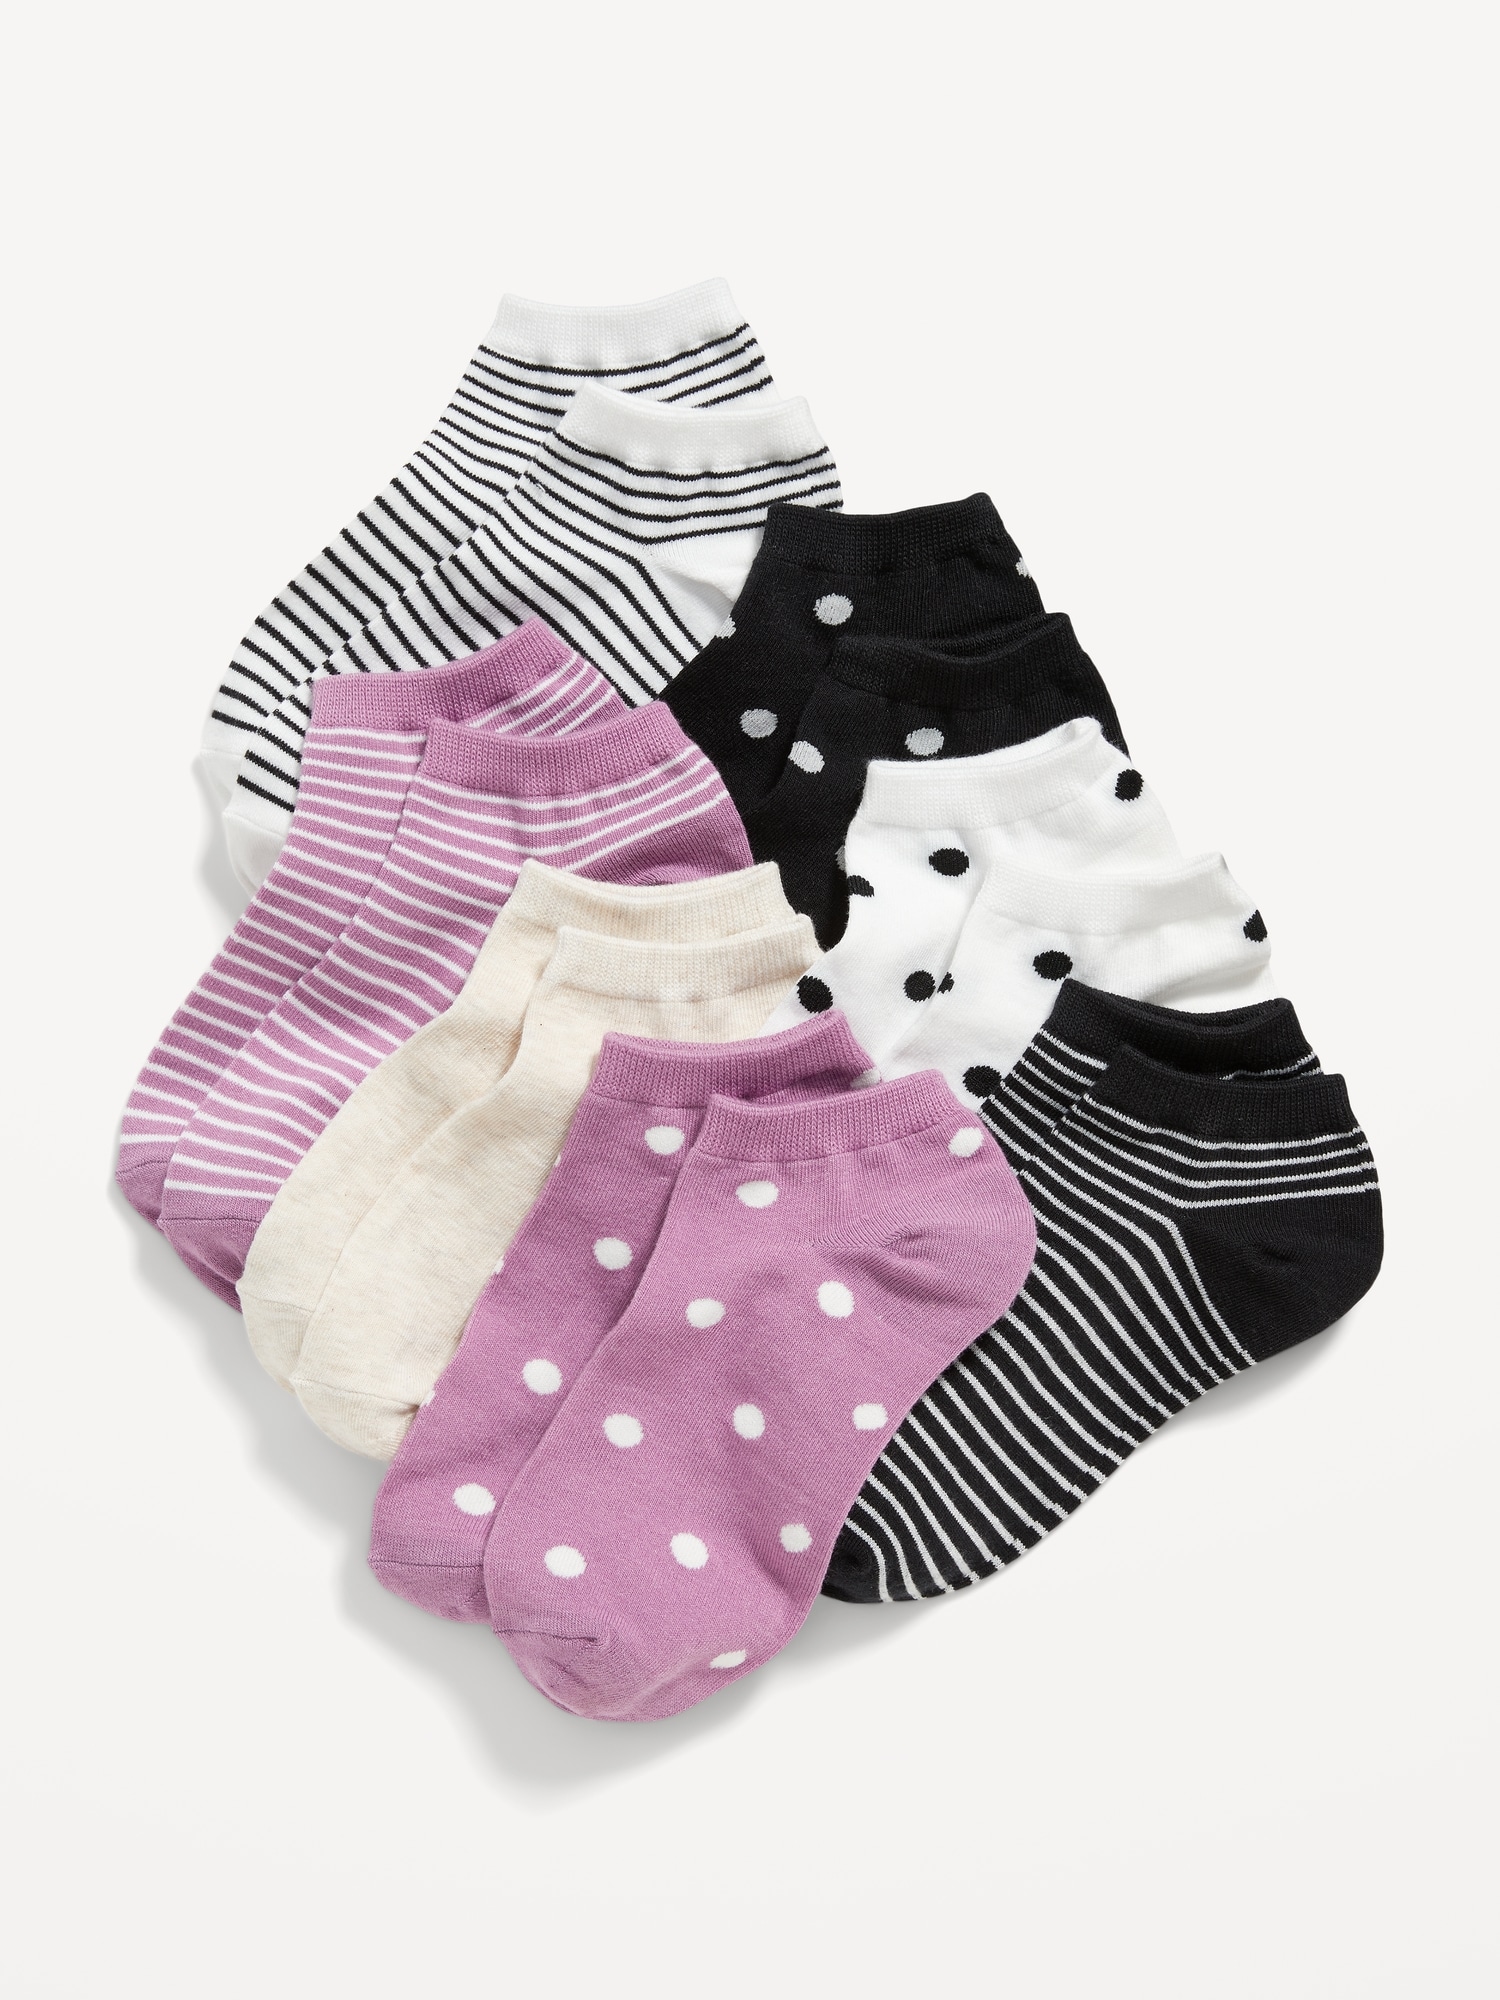 Old Navy Printed Ankle Socks 7-Pack for Girls pink. 1